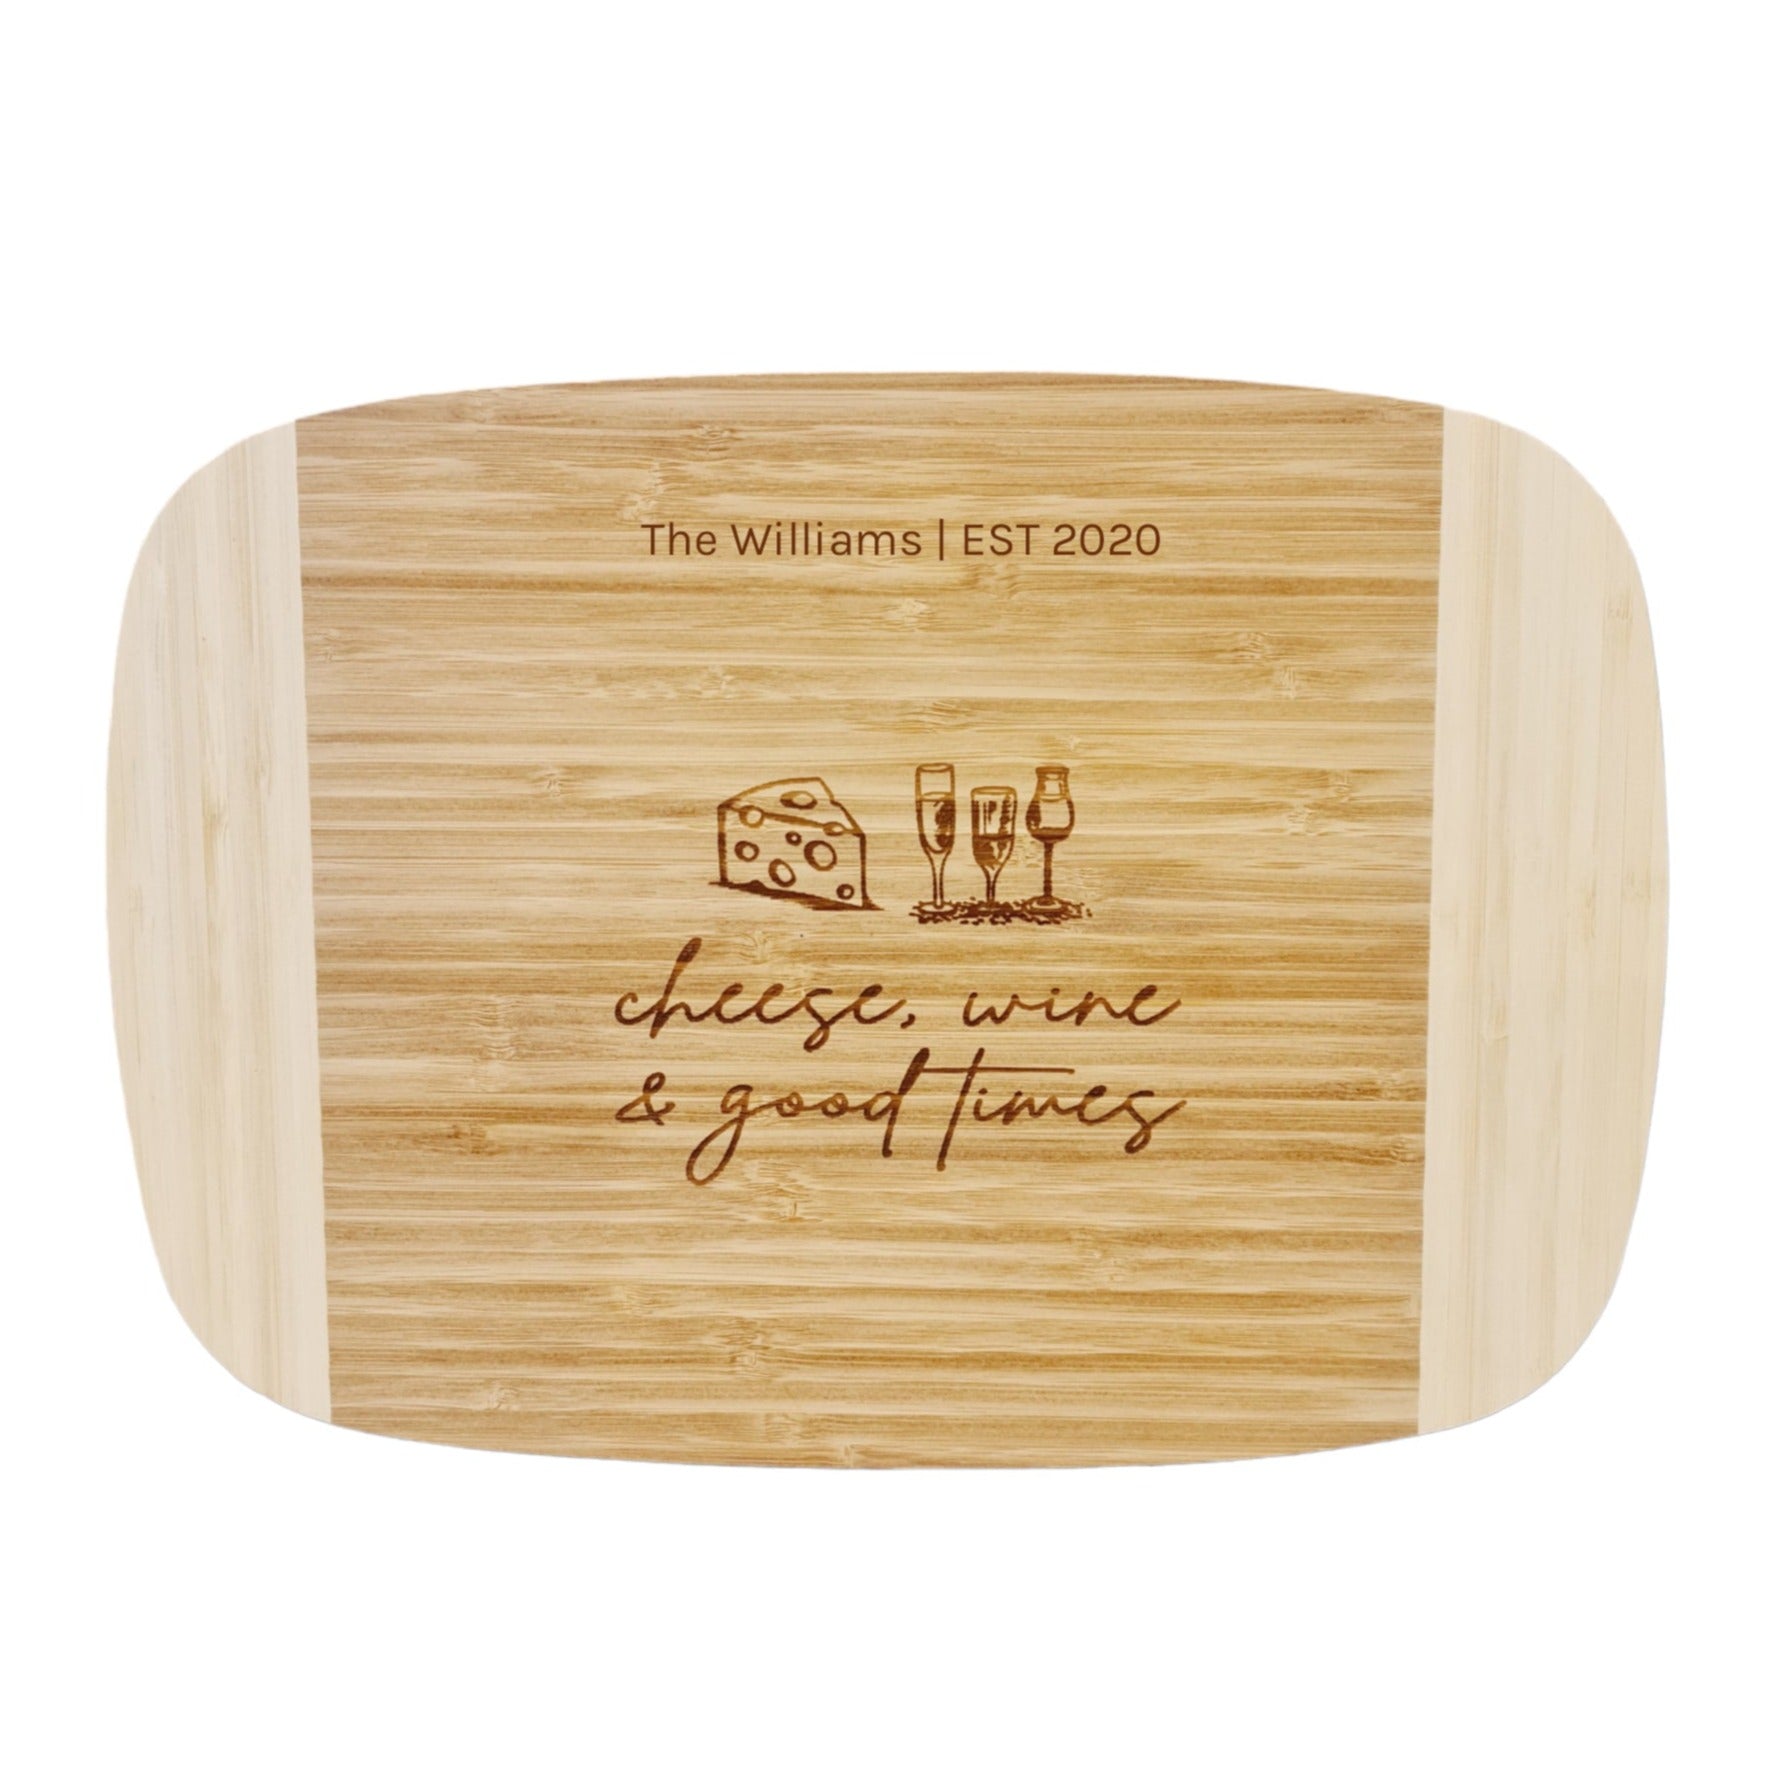 Bamboo Cutting board with personalisation at the top